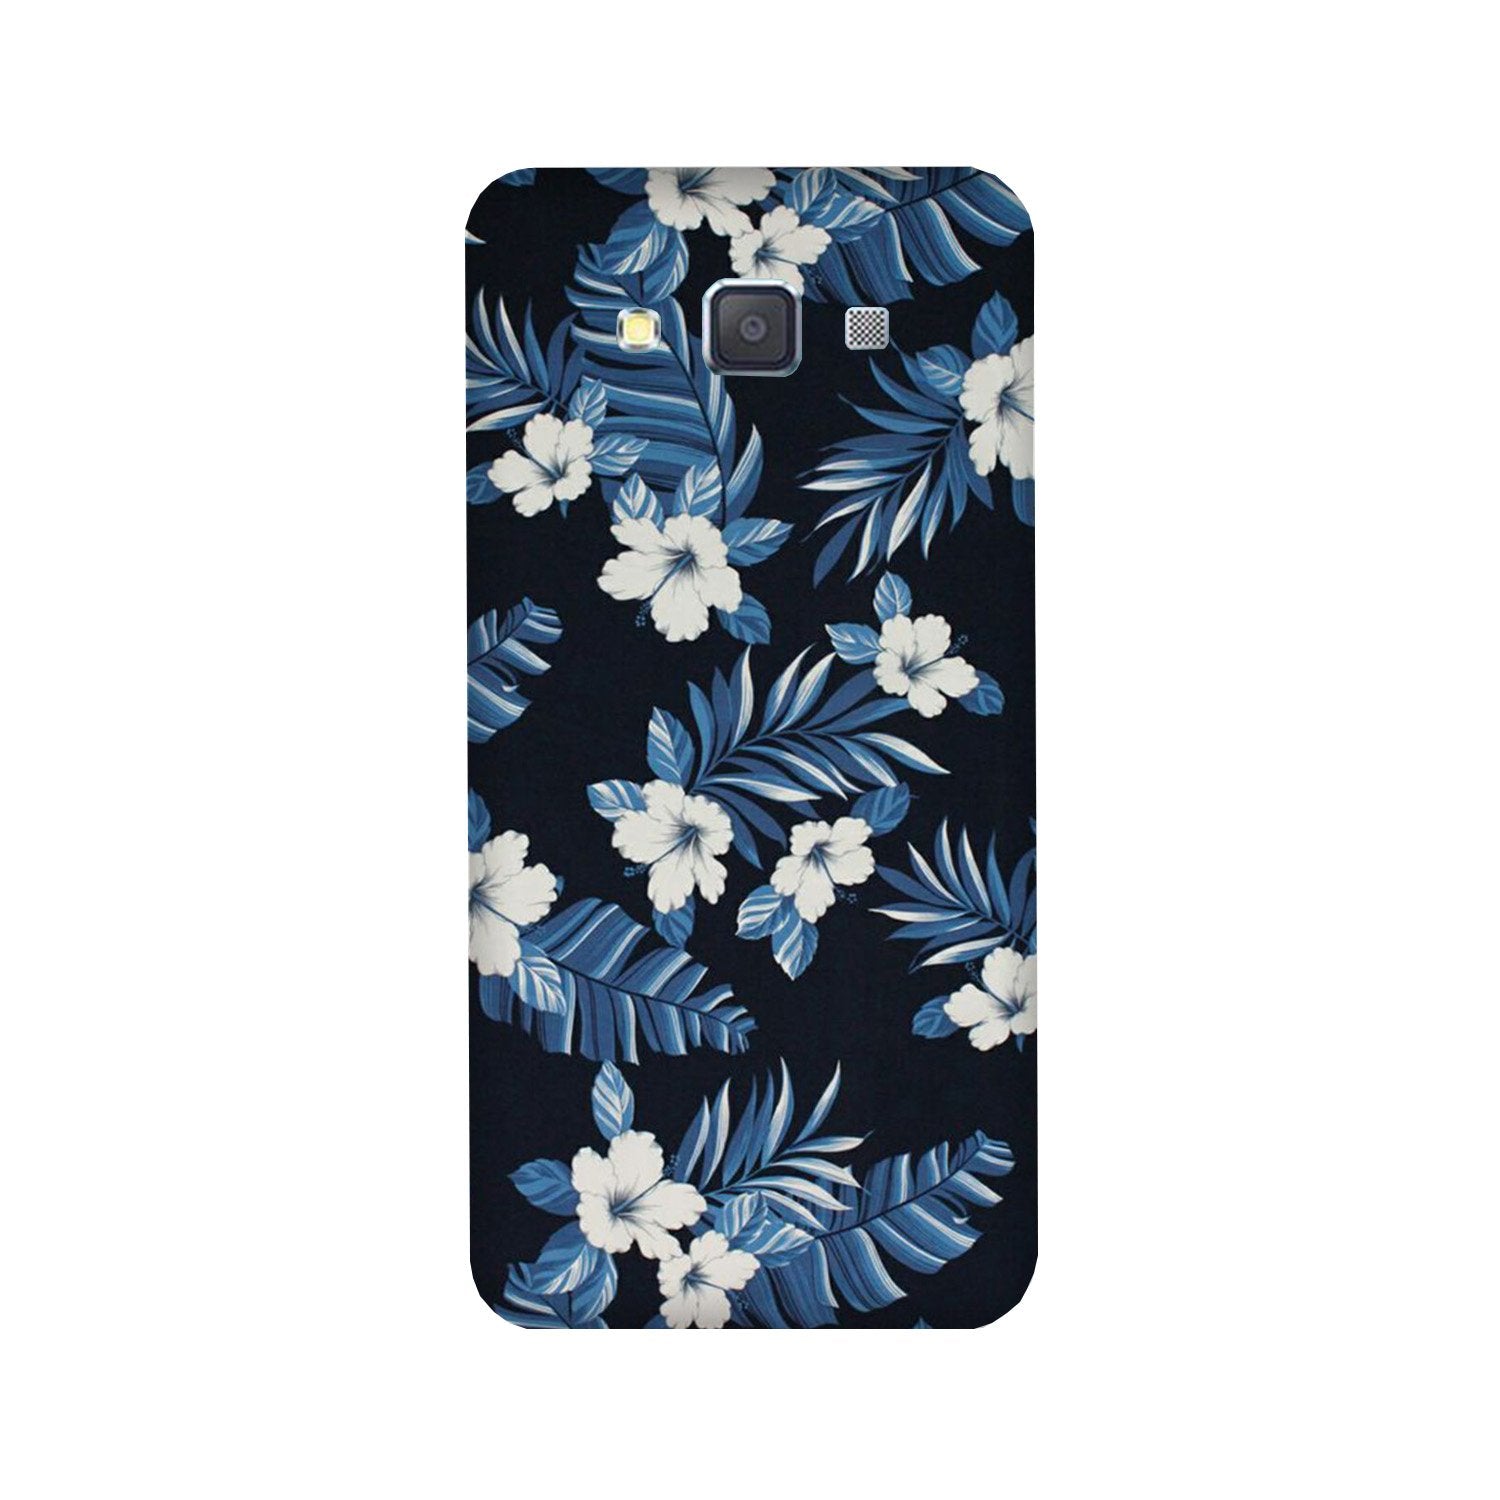 White flowers Blue Background2 Case for Galaxy Grand 2